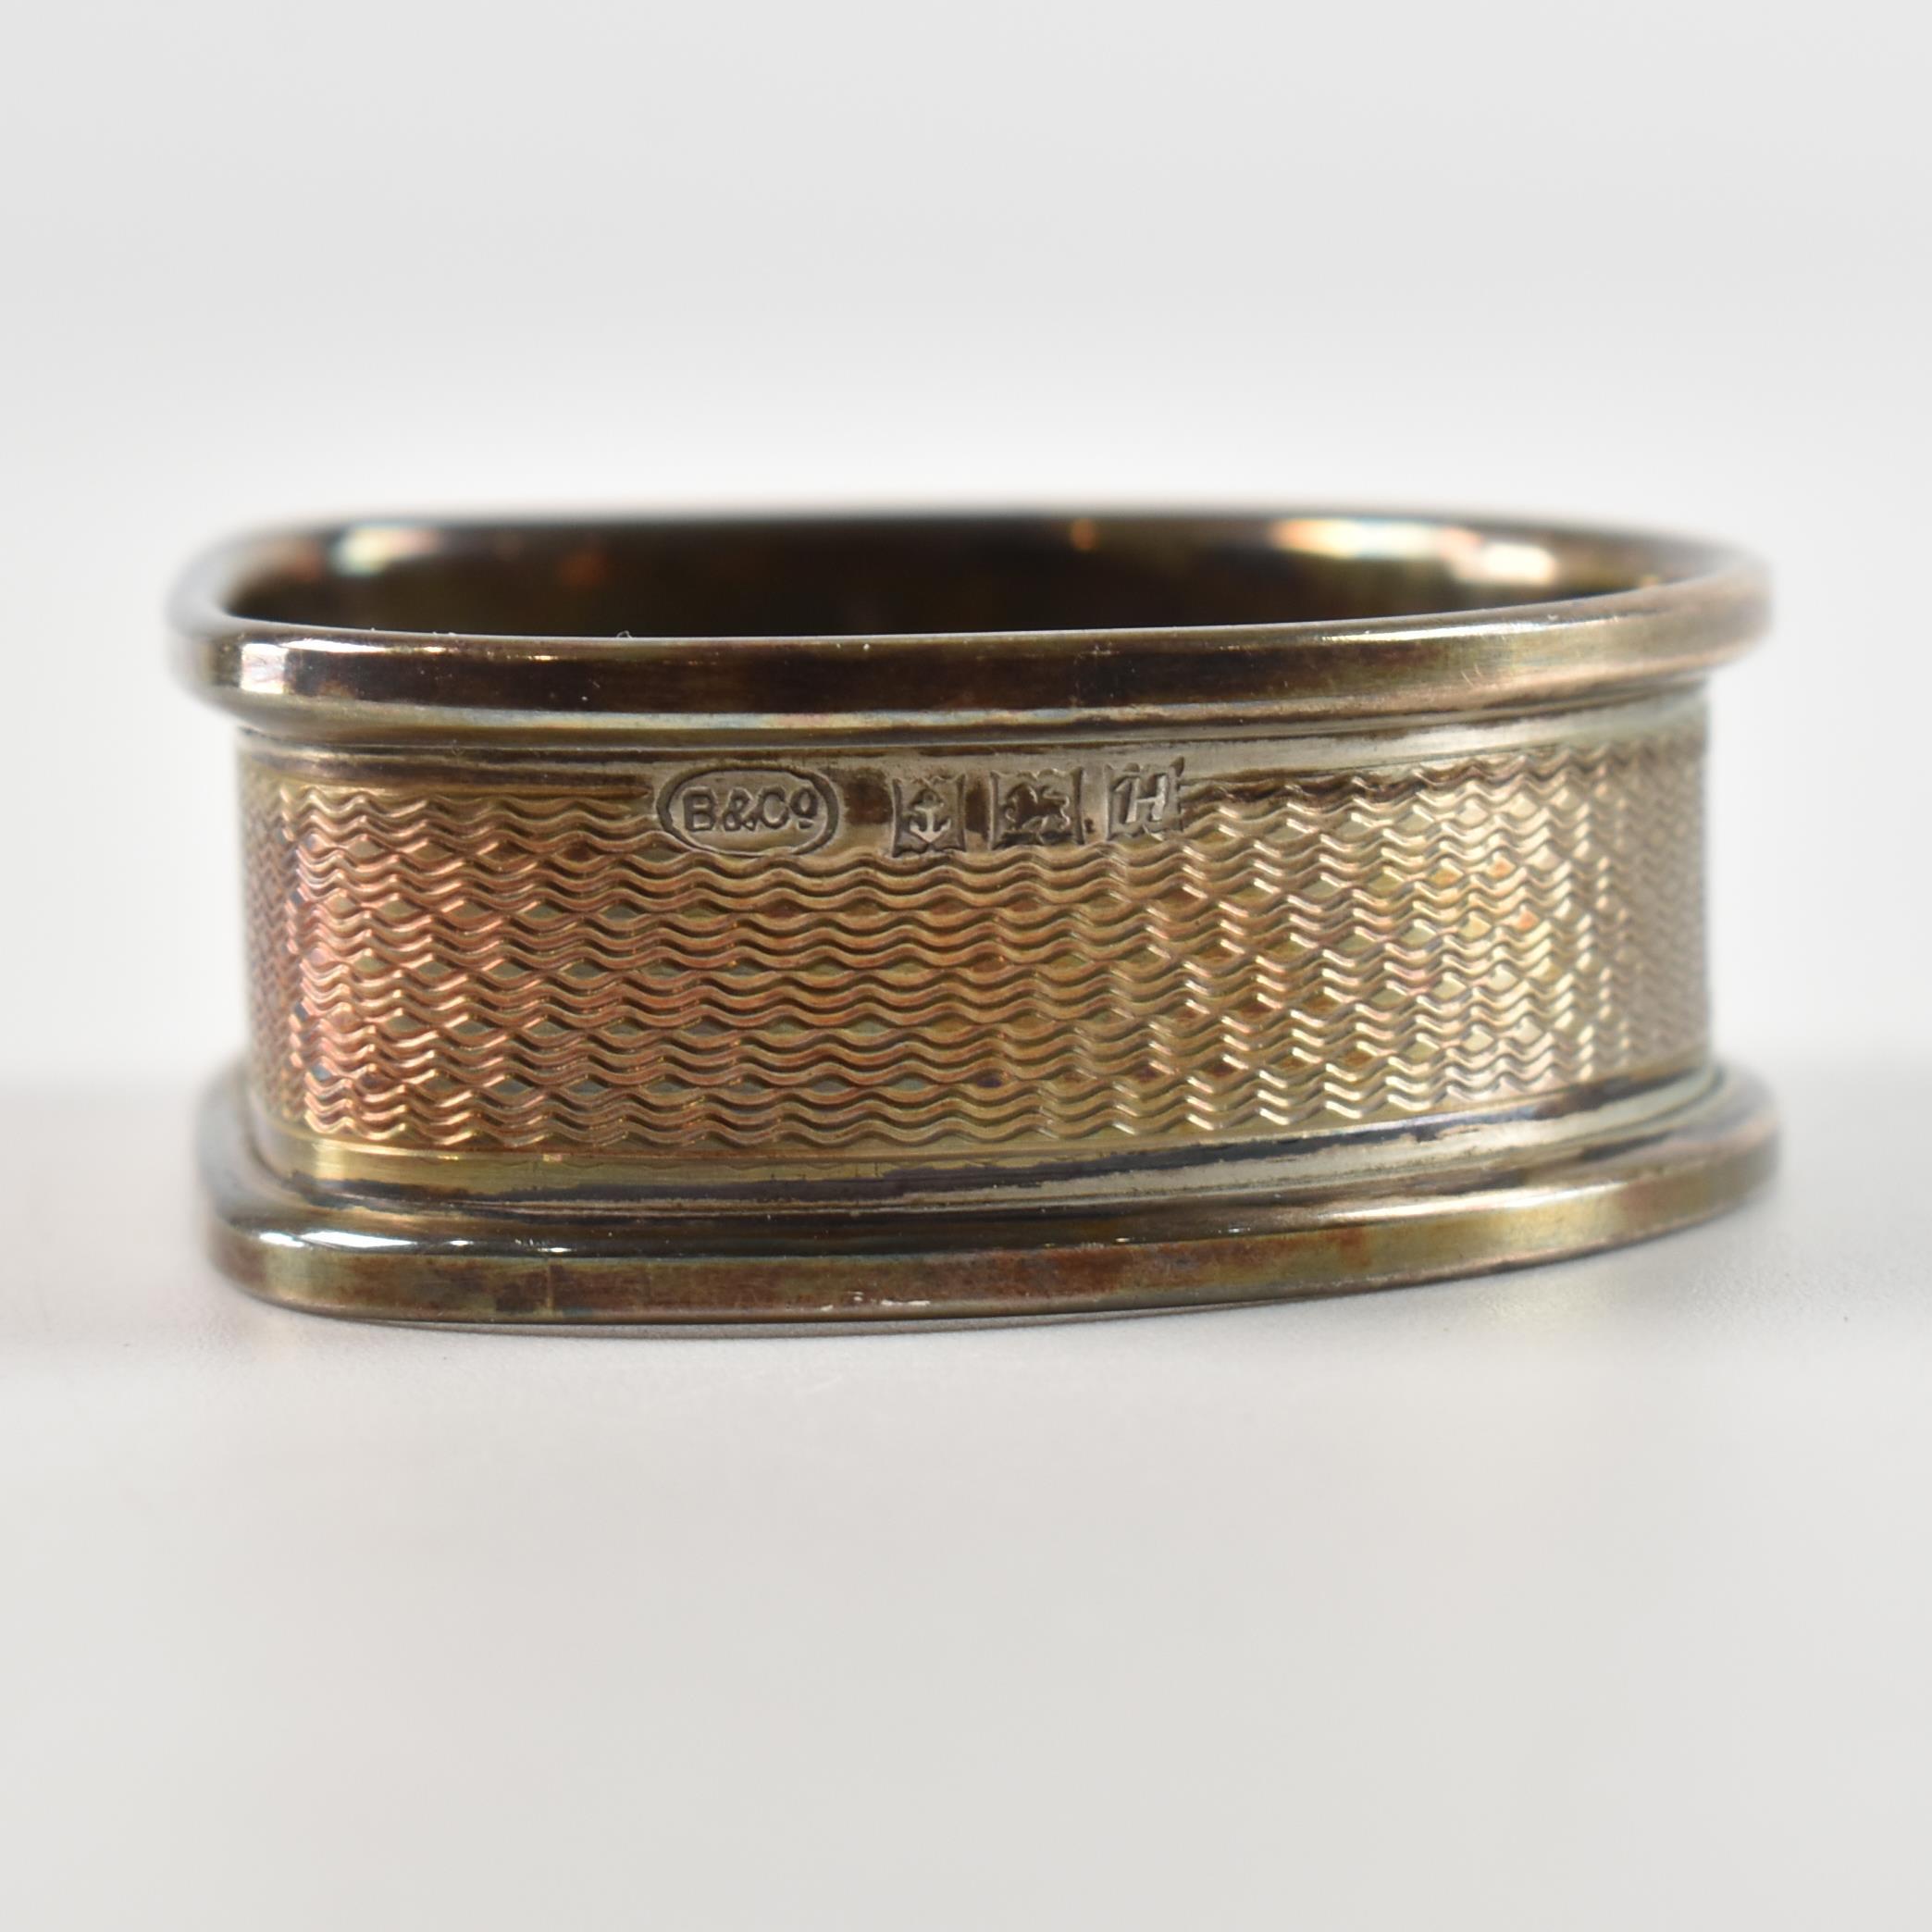 SIX 20TH CENTURY HALLMARKED SILVER NAPKIN RINGS OF VARIOUS SHAPES - Image 8 of 8